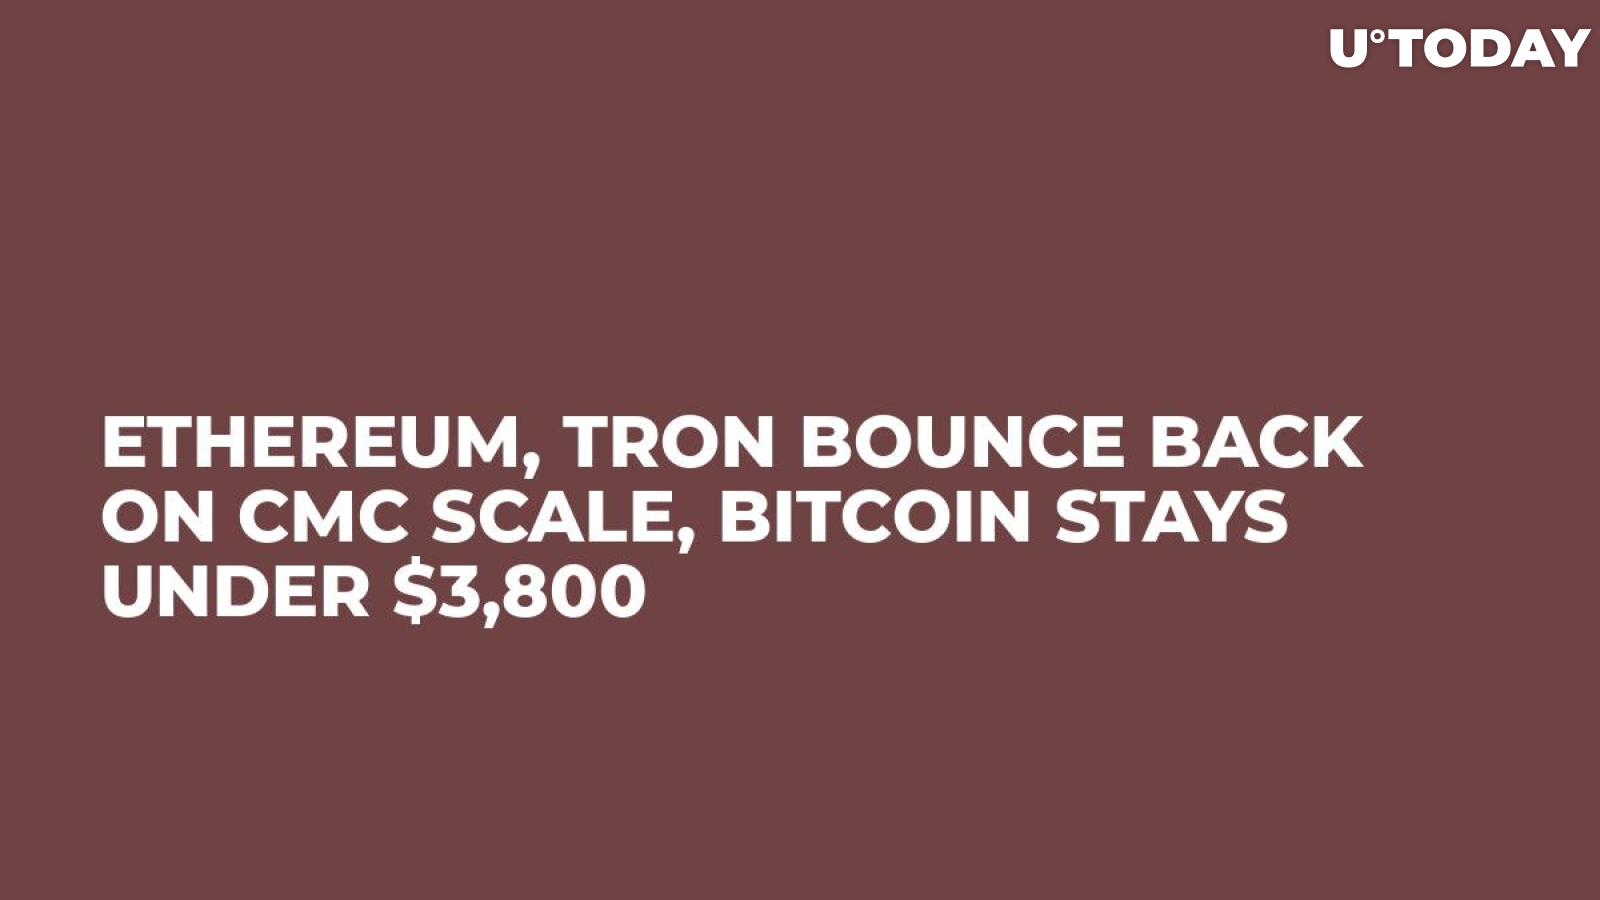 Ethereum, Tron Bounce Back on CMC Scale, Bitcoin Stays Under $3,800